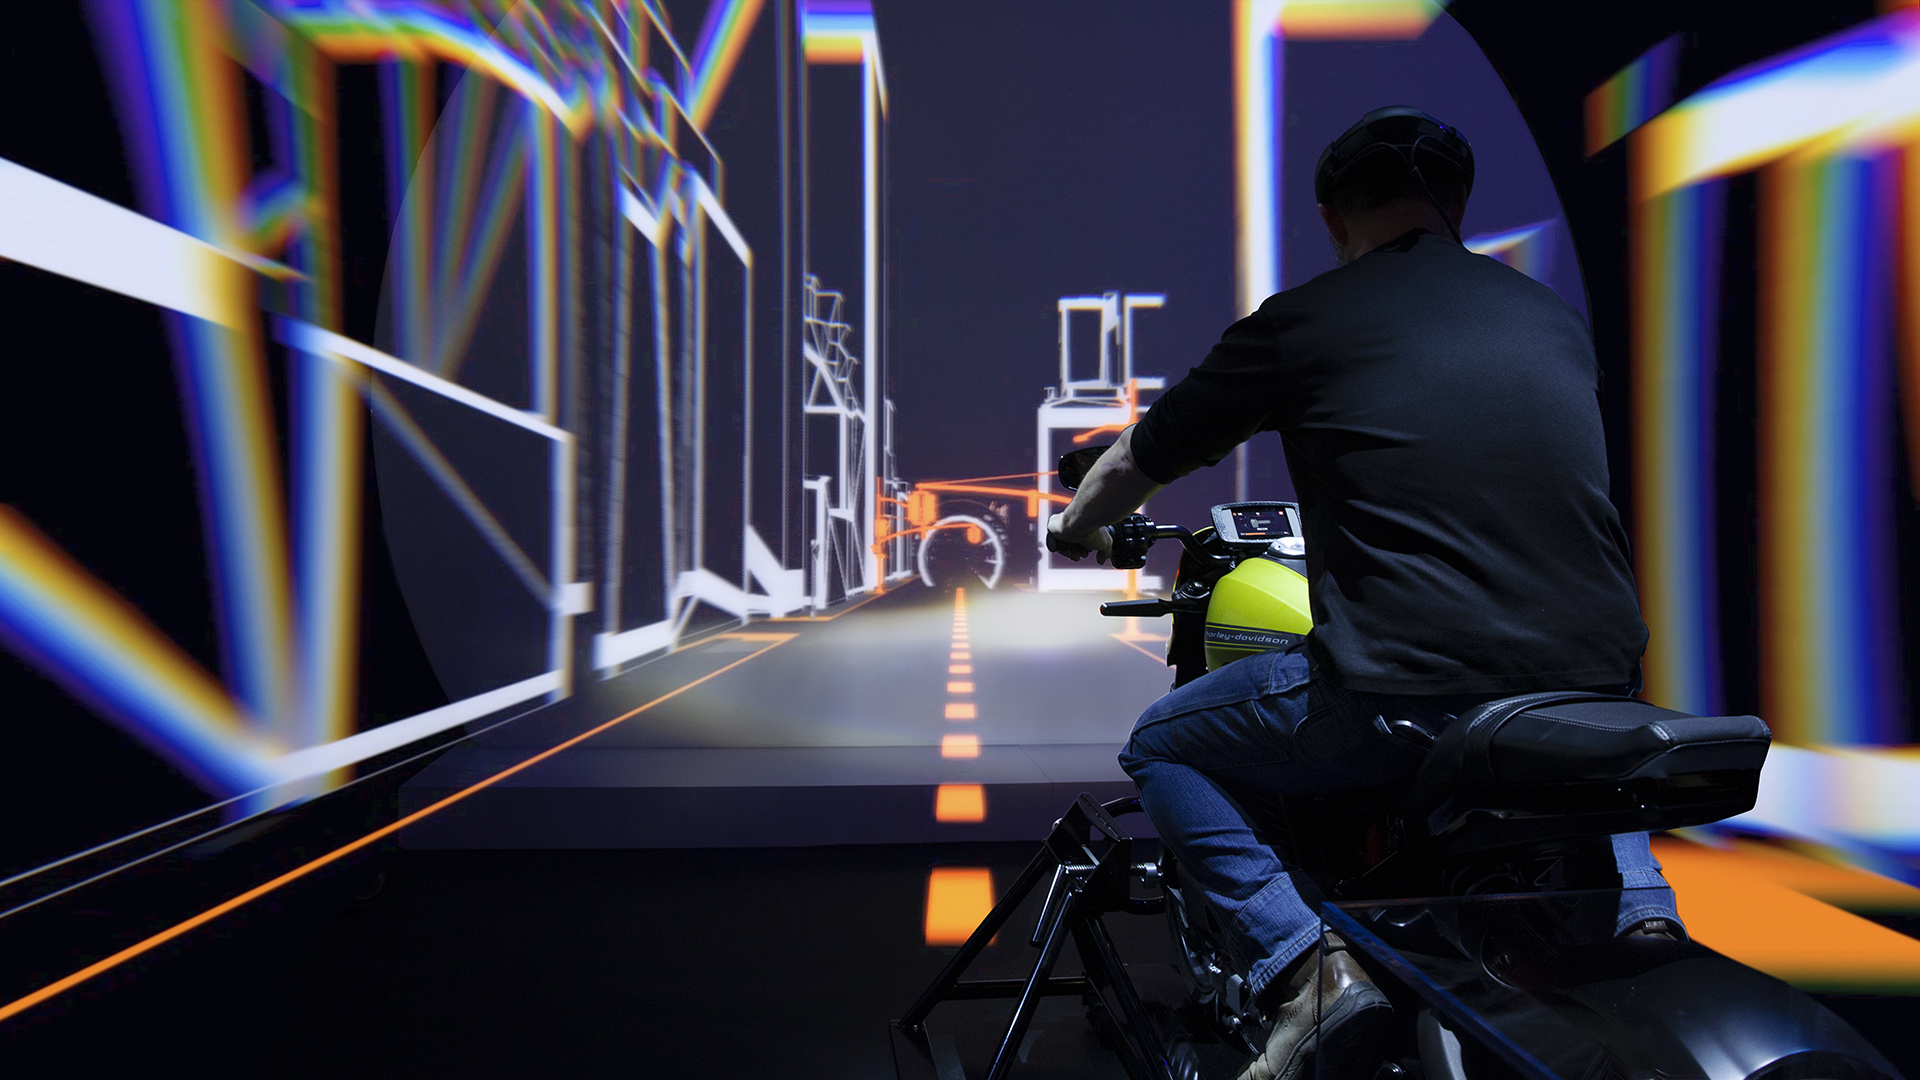 Man experiences harley davidson electric motorcycle vr experince at CES in Las Vegas